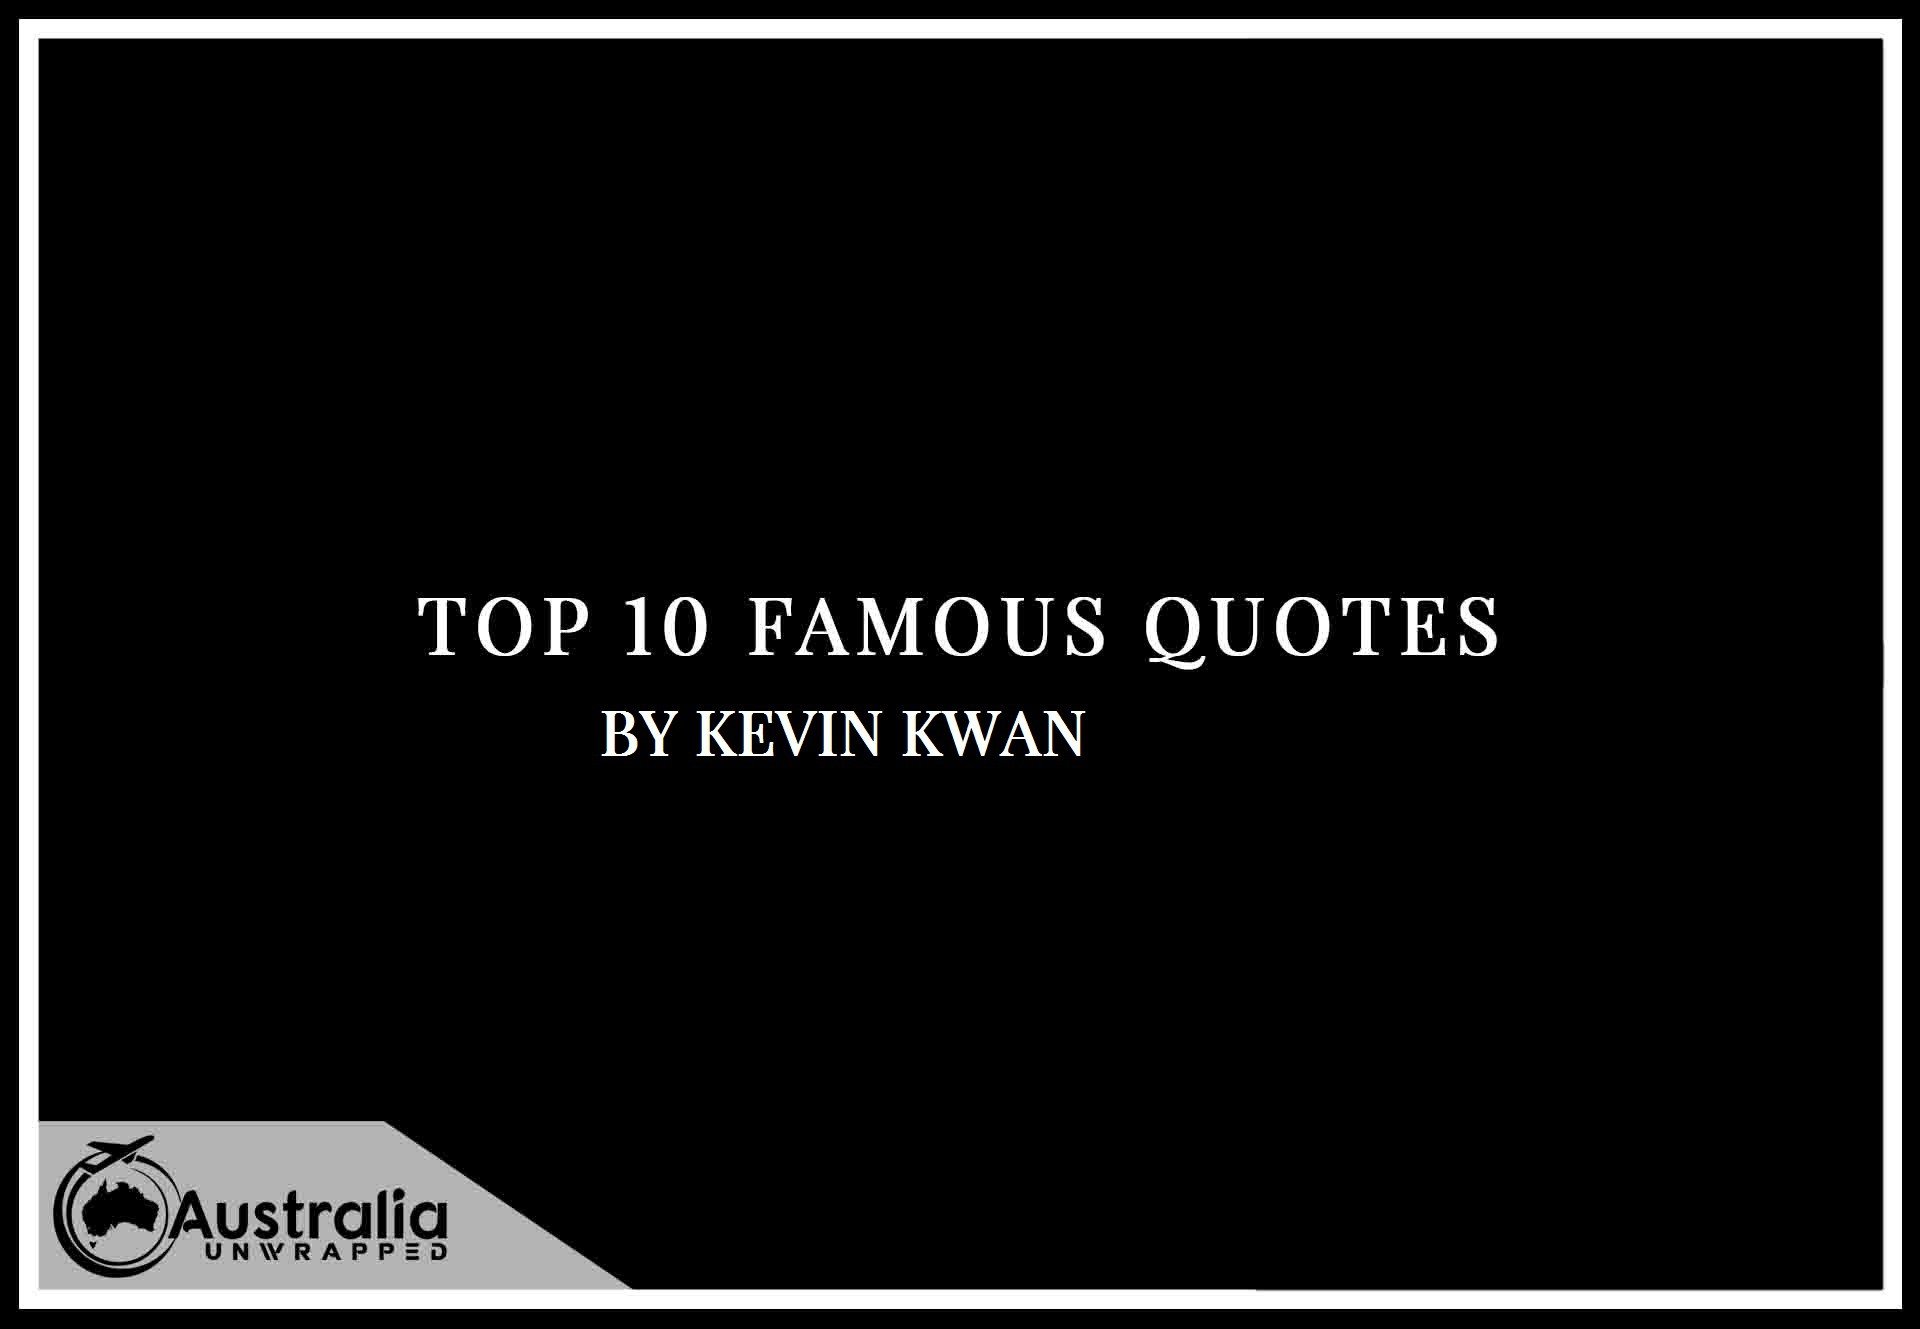 Kevin Kwan’s Top 10 Popular and Famous Quotes